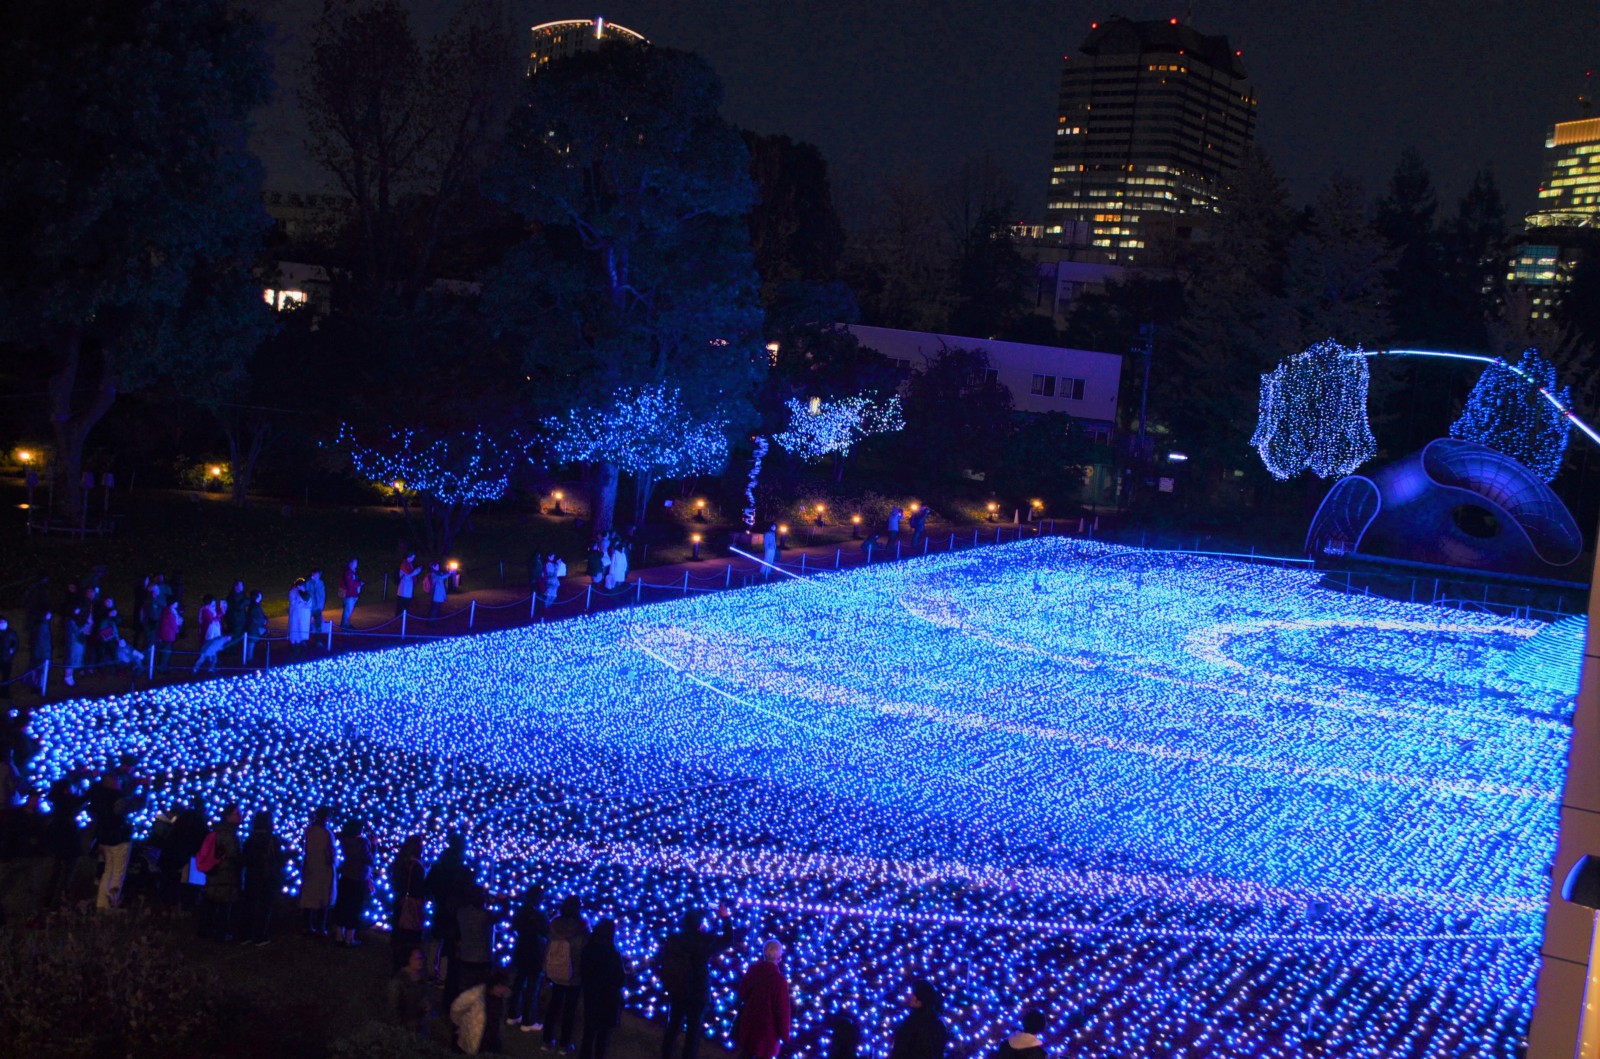 Romantic and spectacular winter illuminations in Tokyo